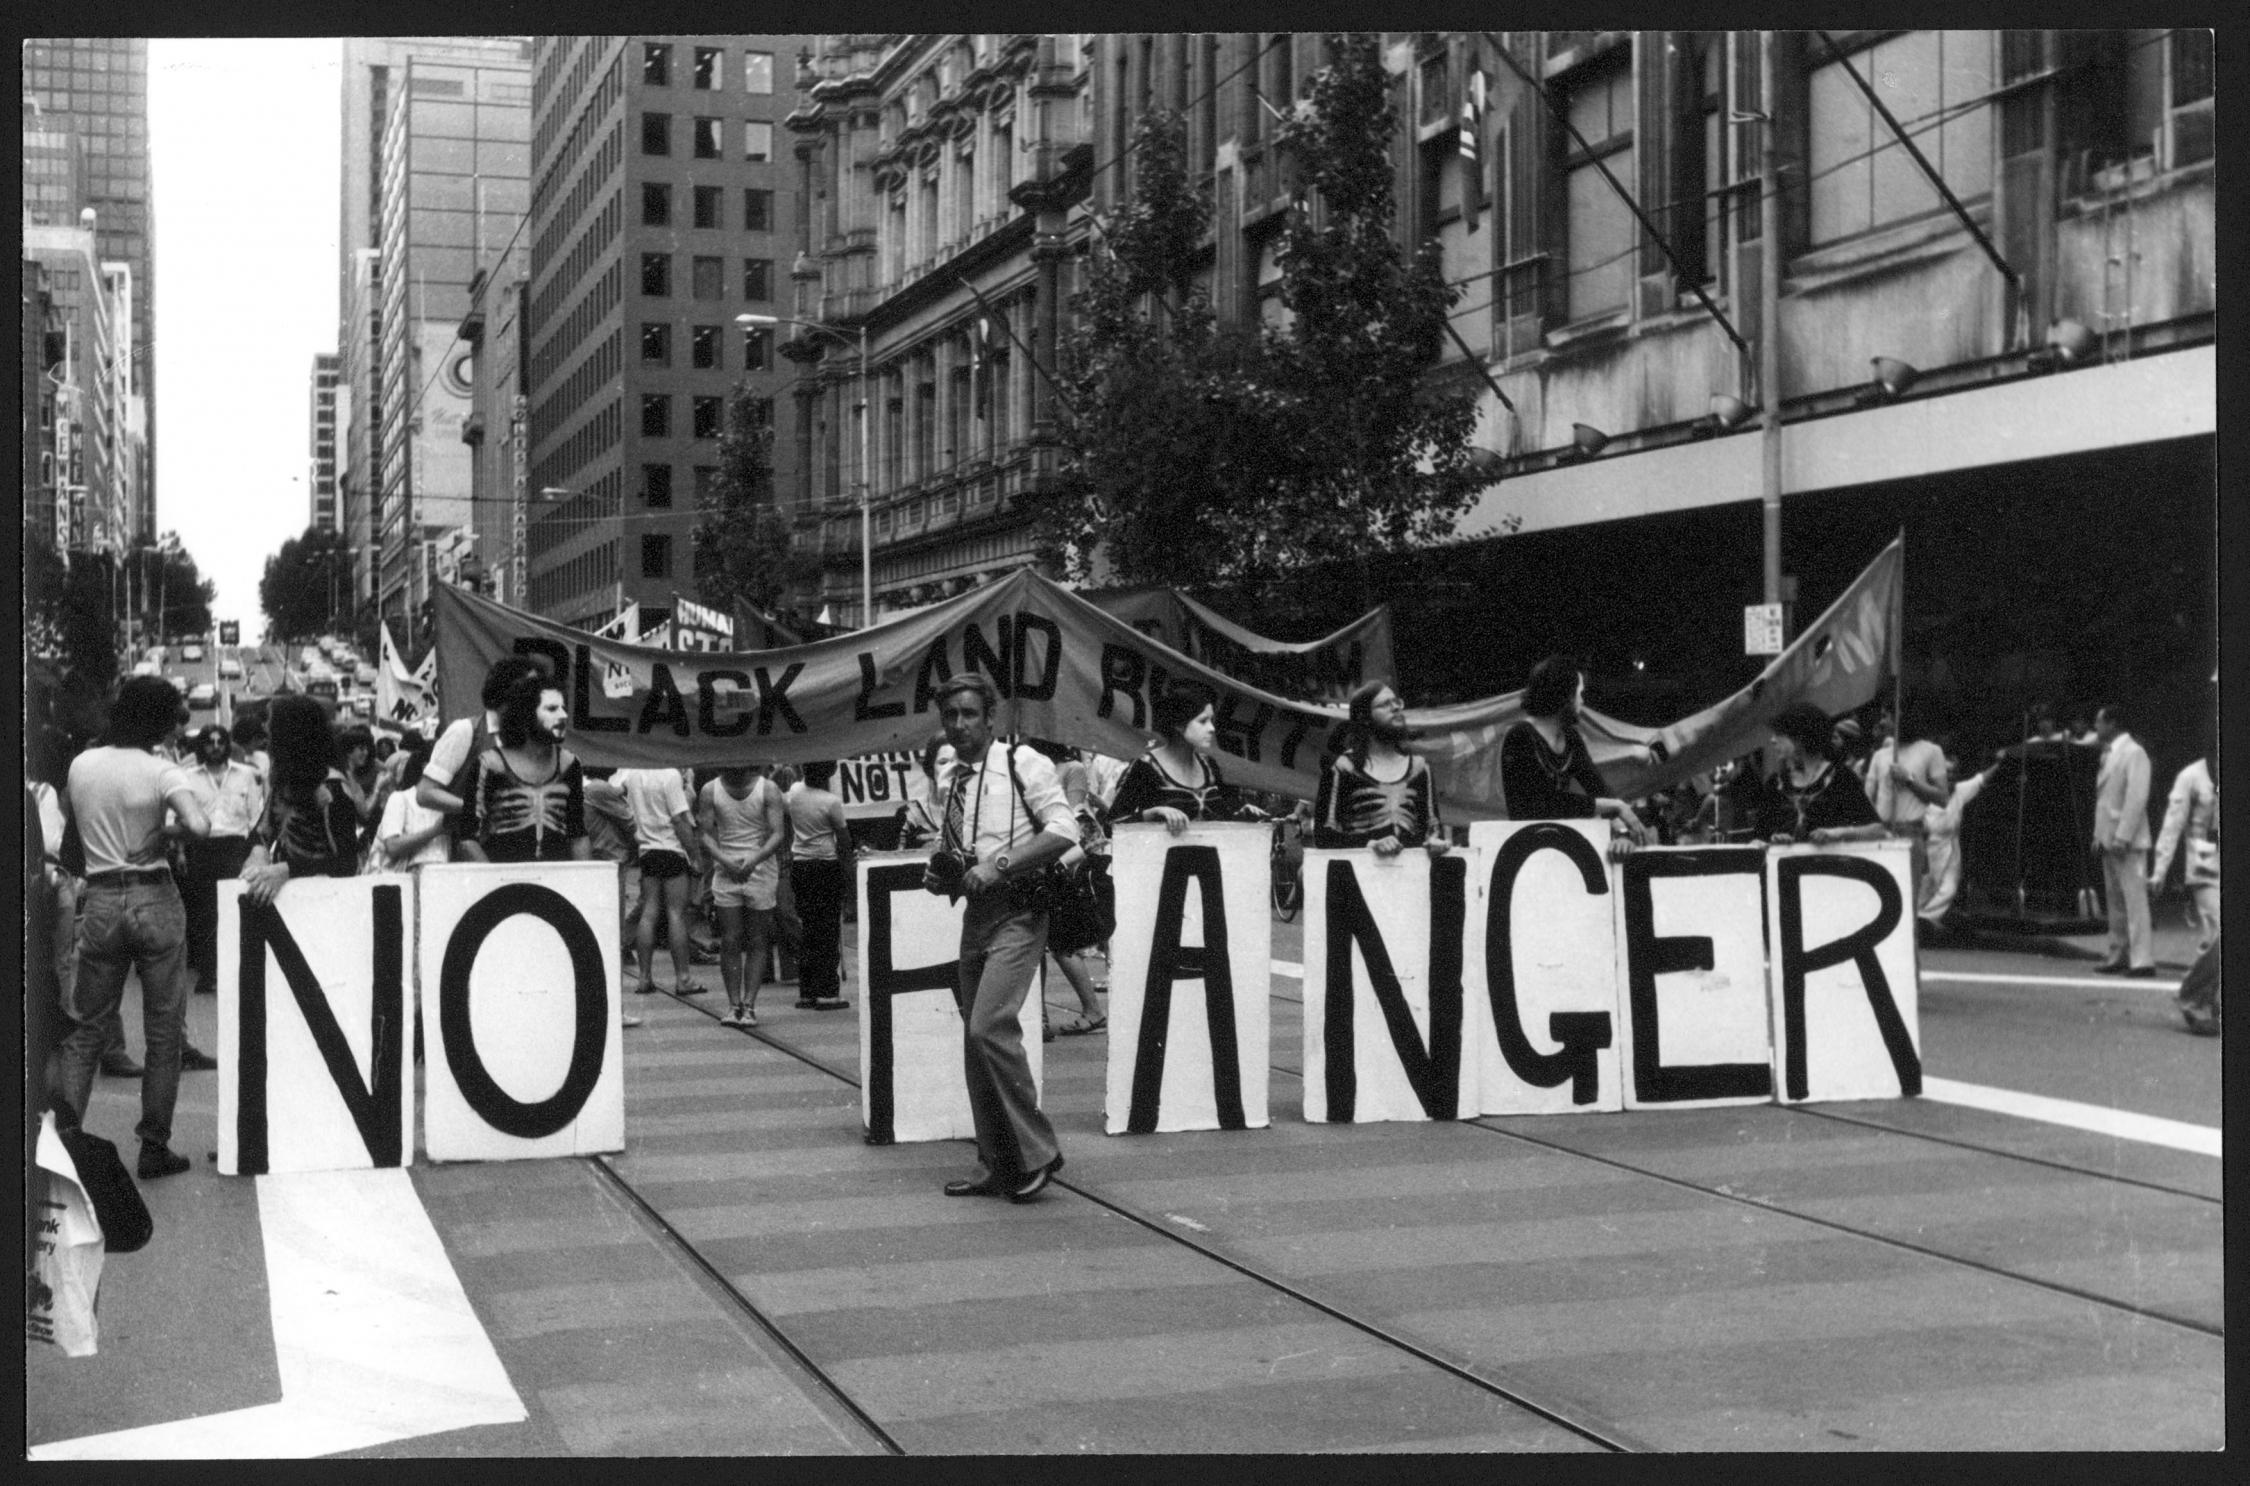 Street protest featuring a 'No Ranger' sign.